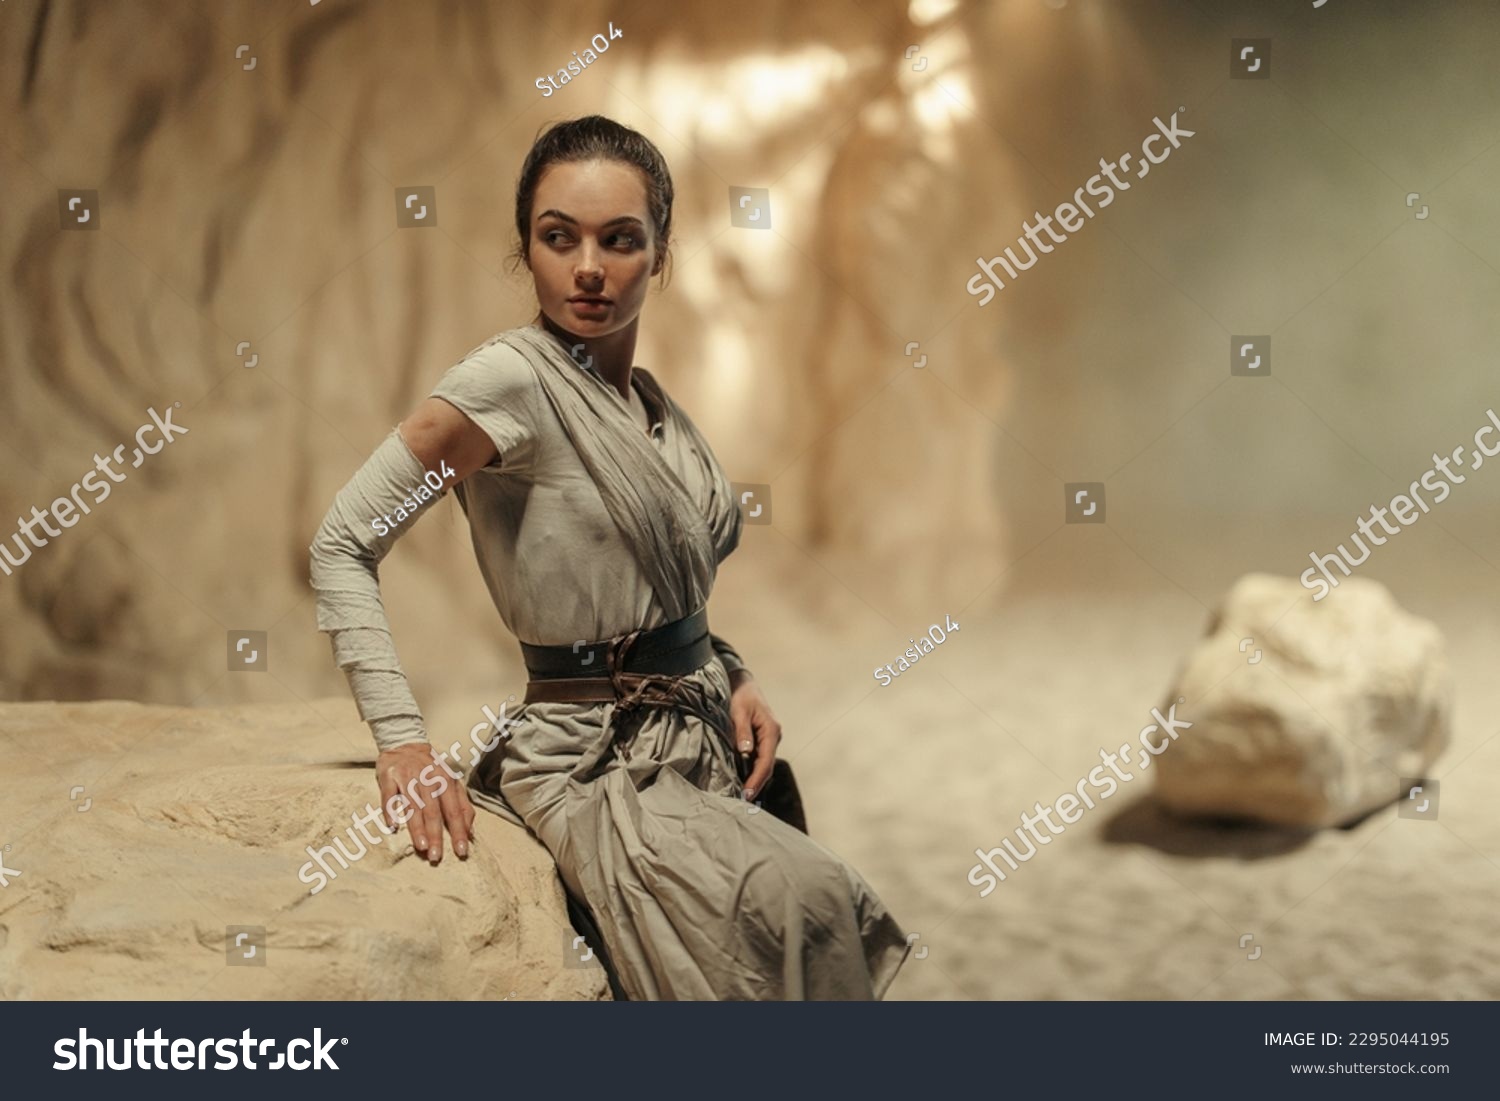 daniel jeary recommends images of rey from star wars pic